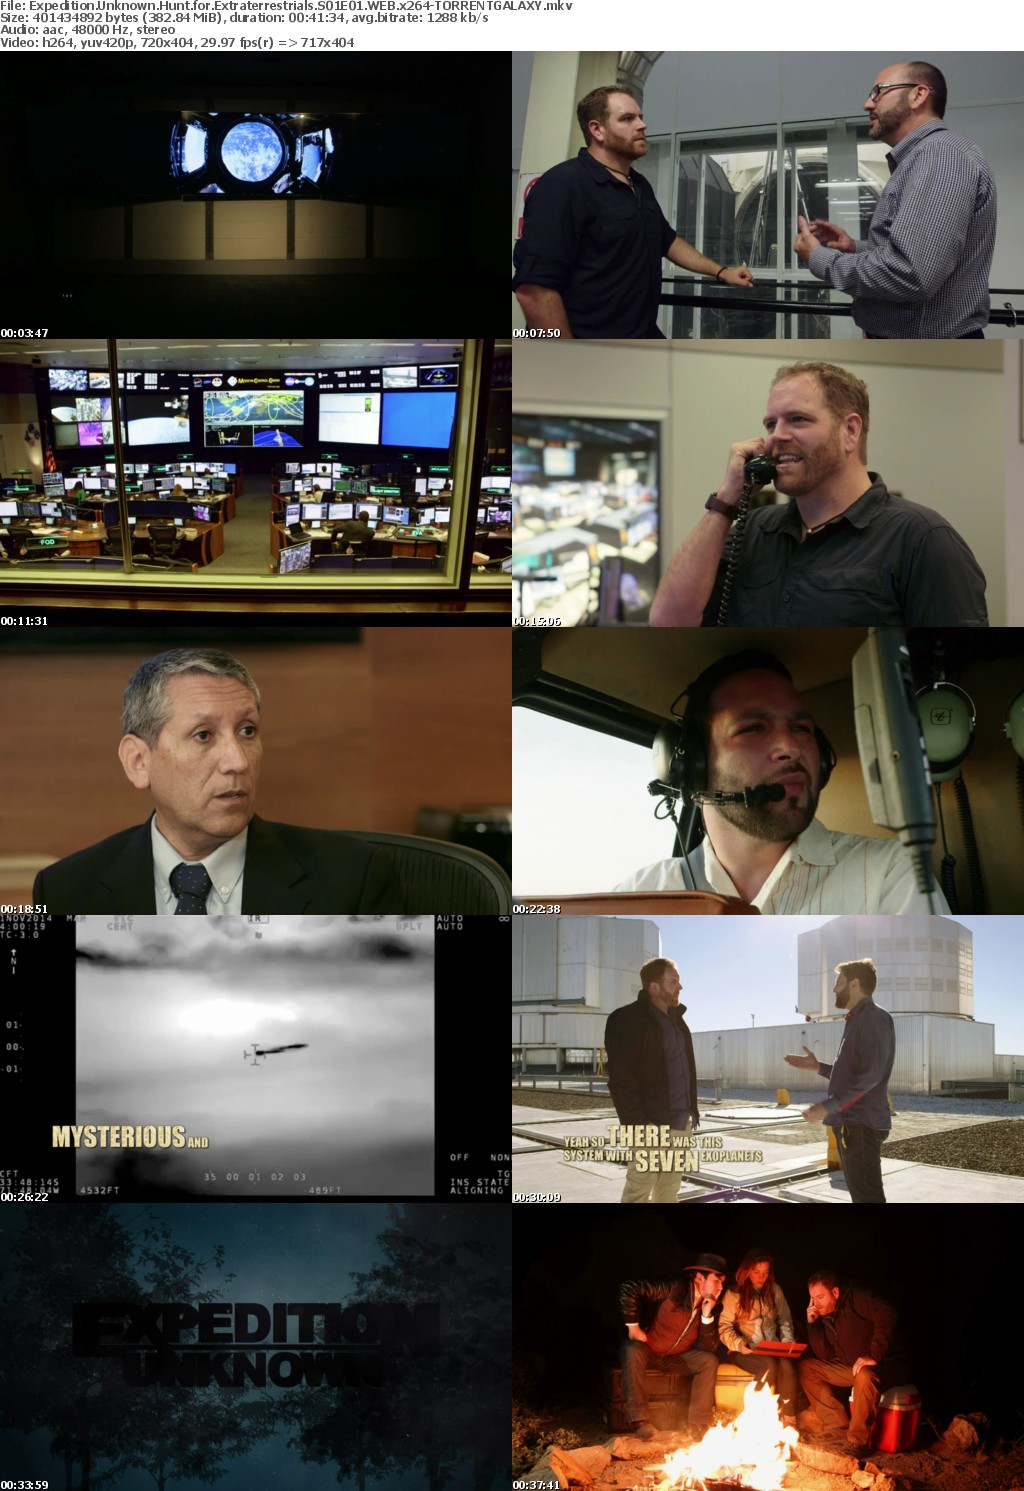 Expedition Unknown Hunt for Extraterrestrials S01E01 WEB x264-GALAXY